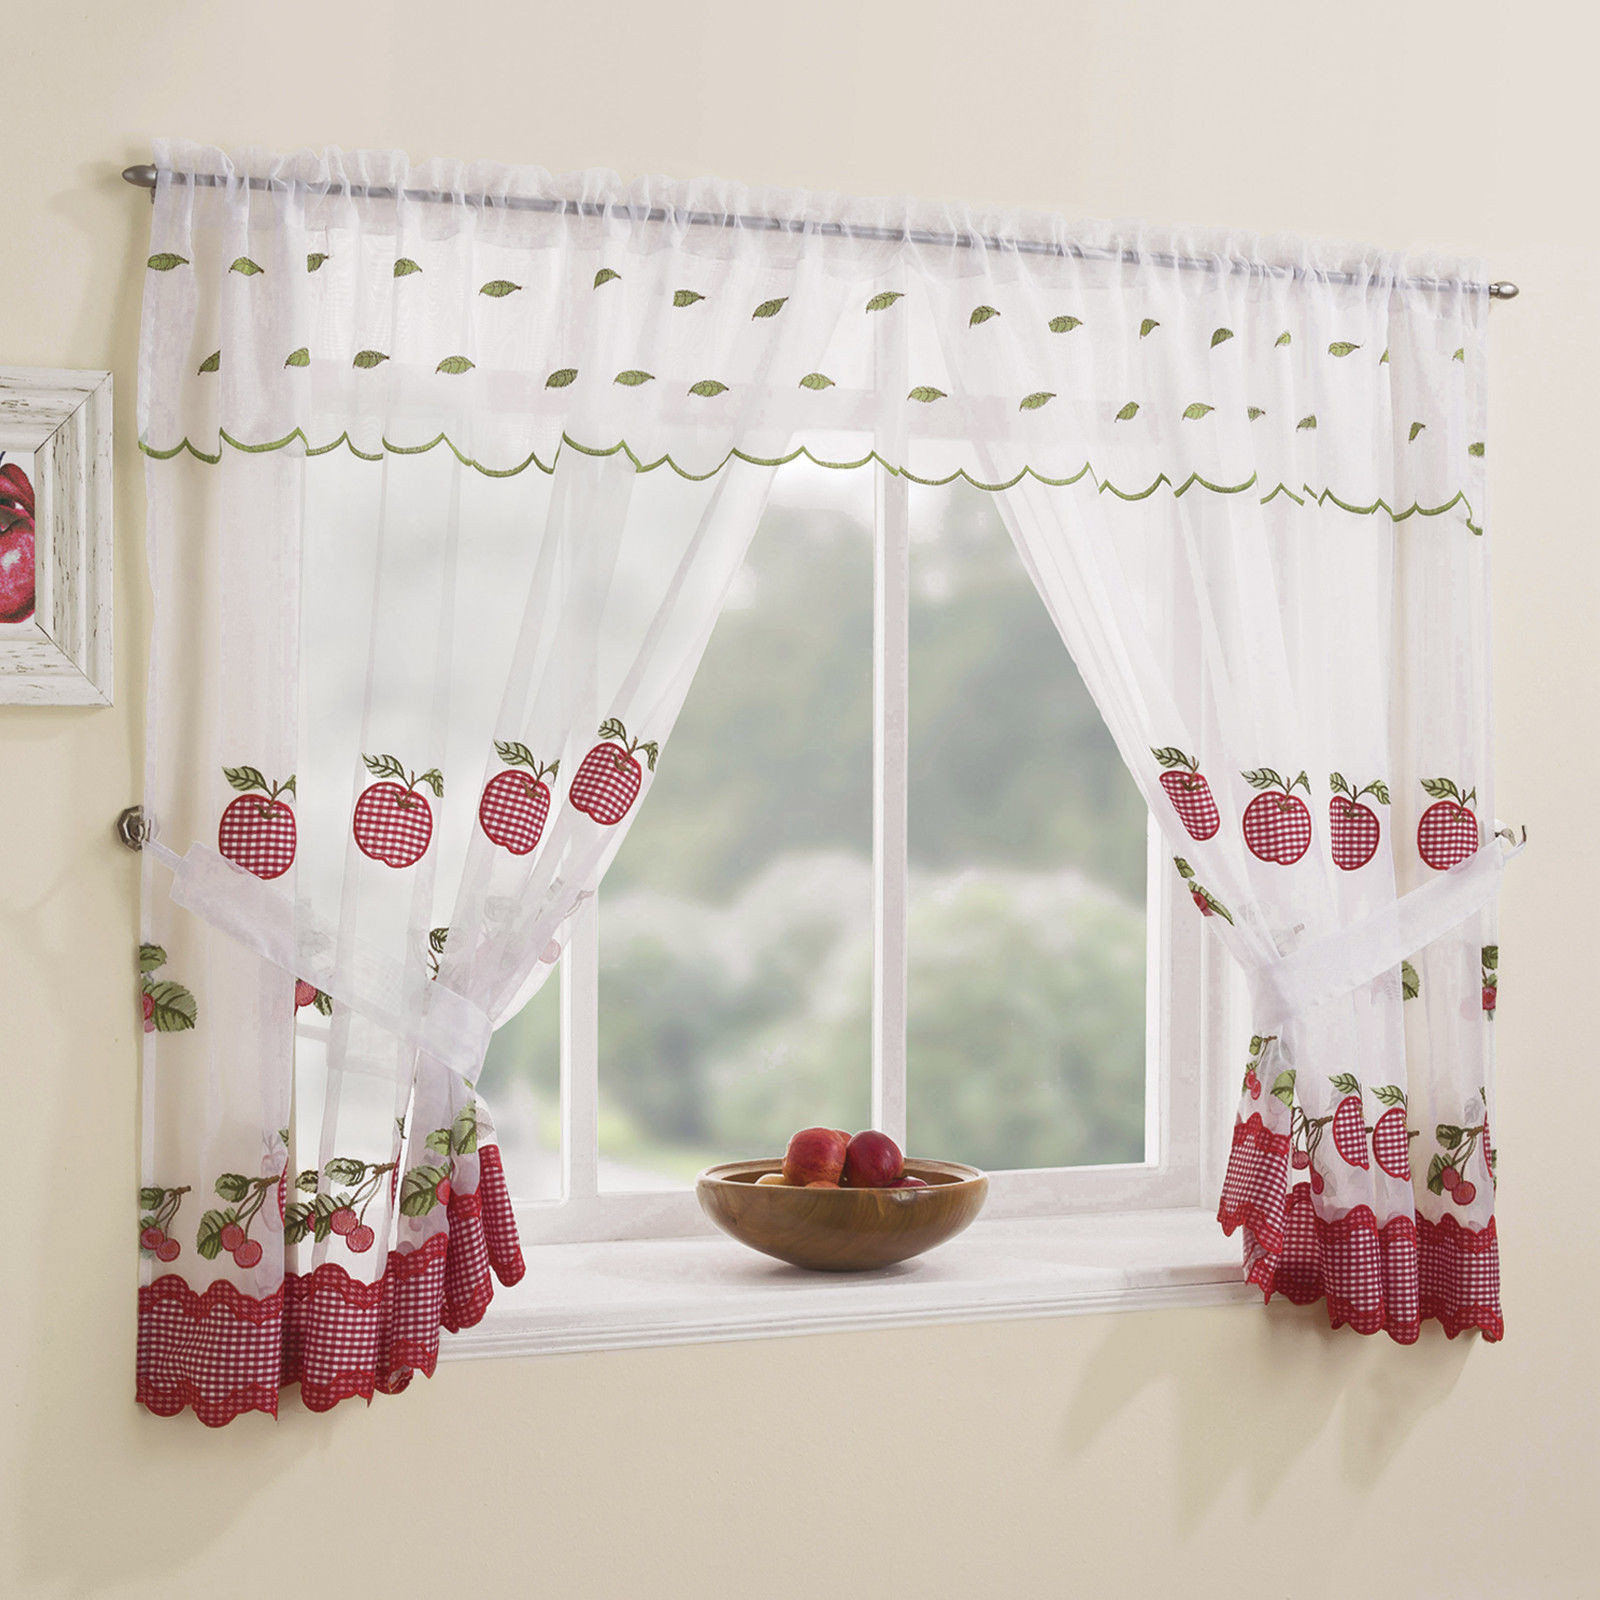 Red Valance Curtains For Kitchen
 WINCHESTER KITCHEN WINDOW SET CHECK CURTAINS & TIE BACKS